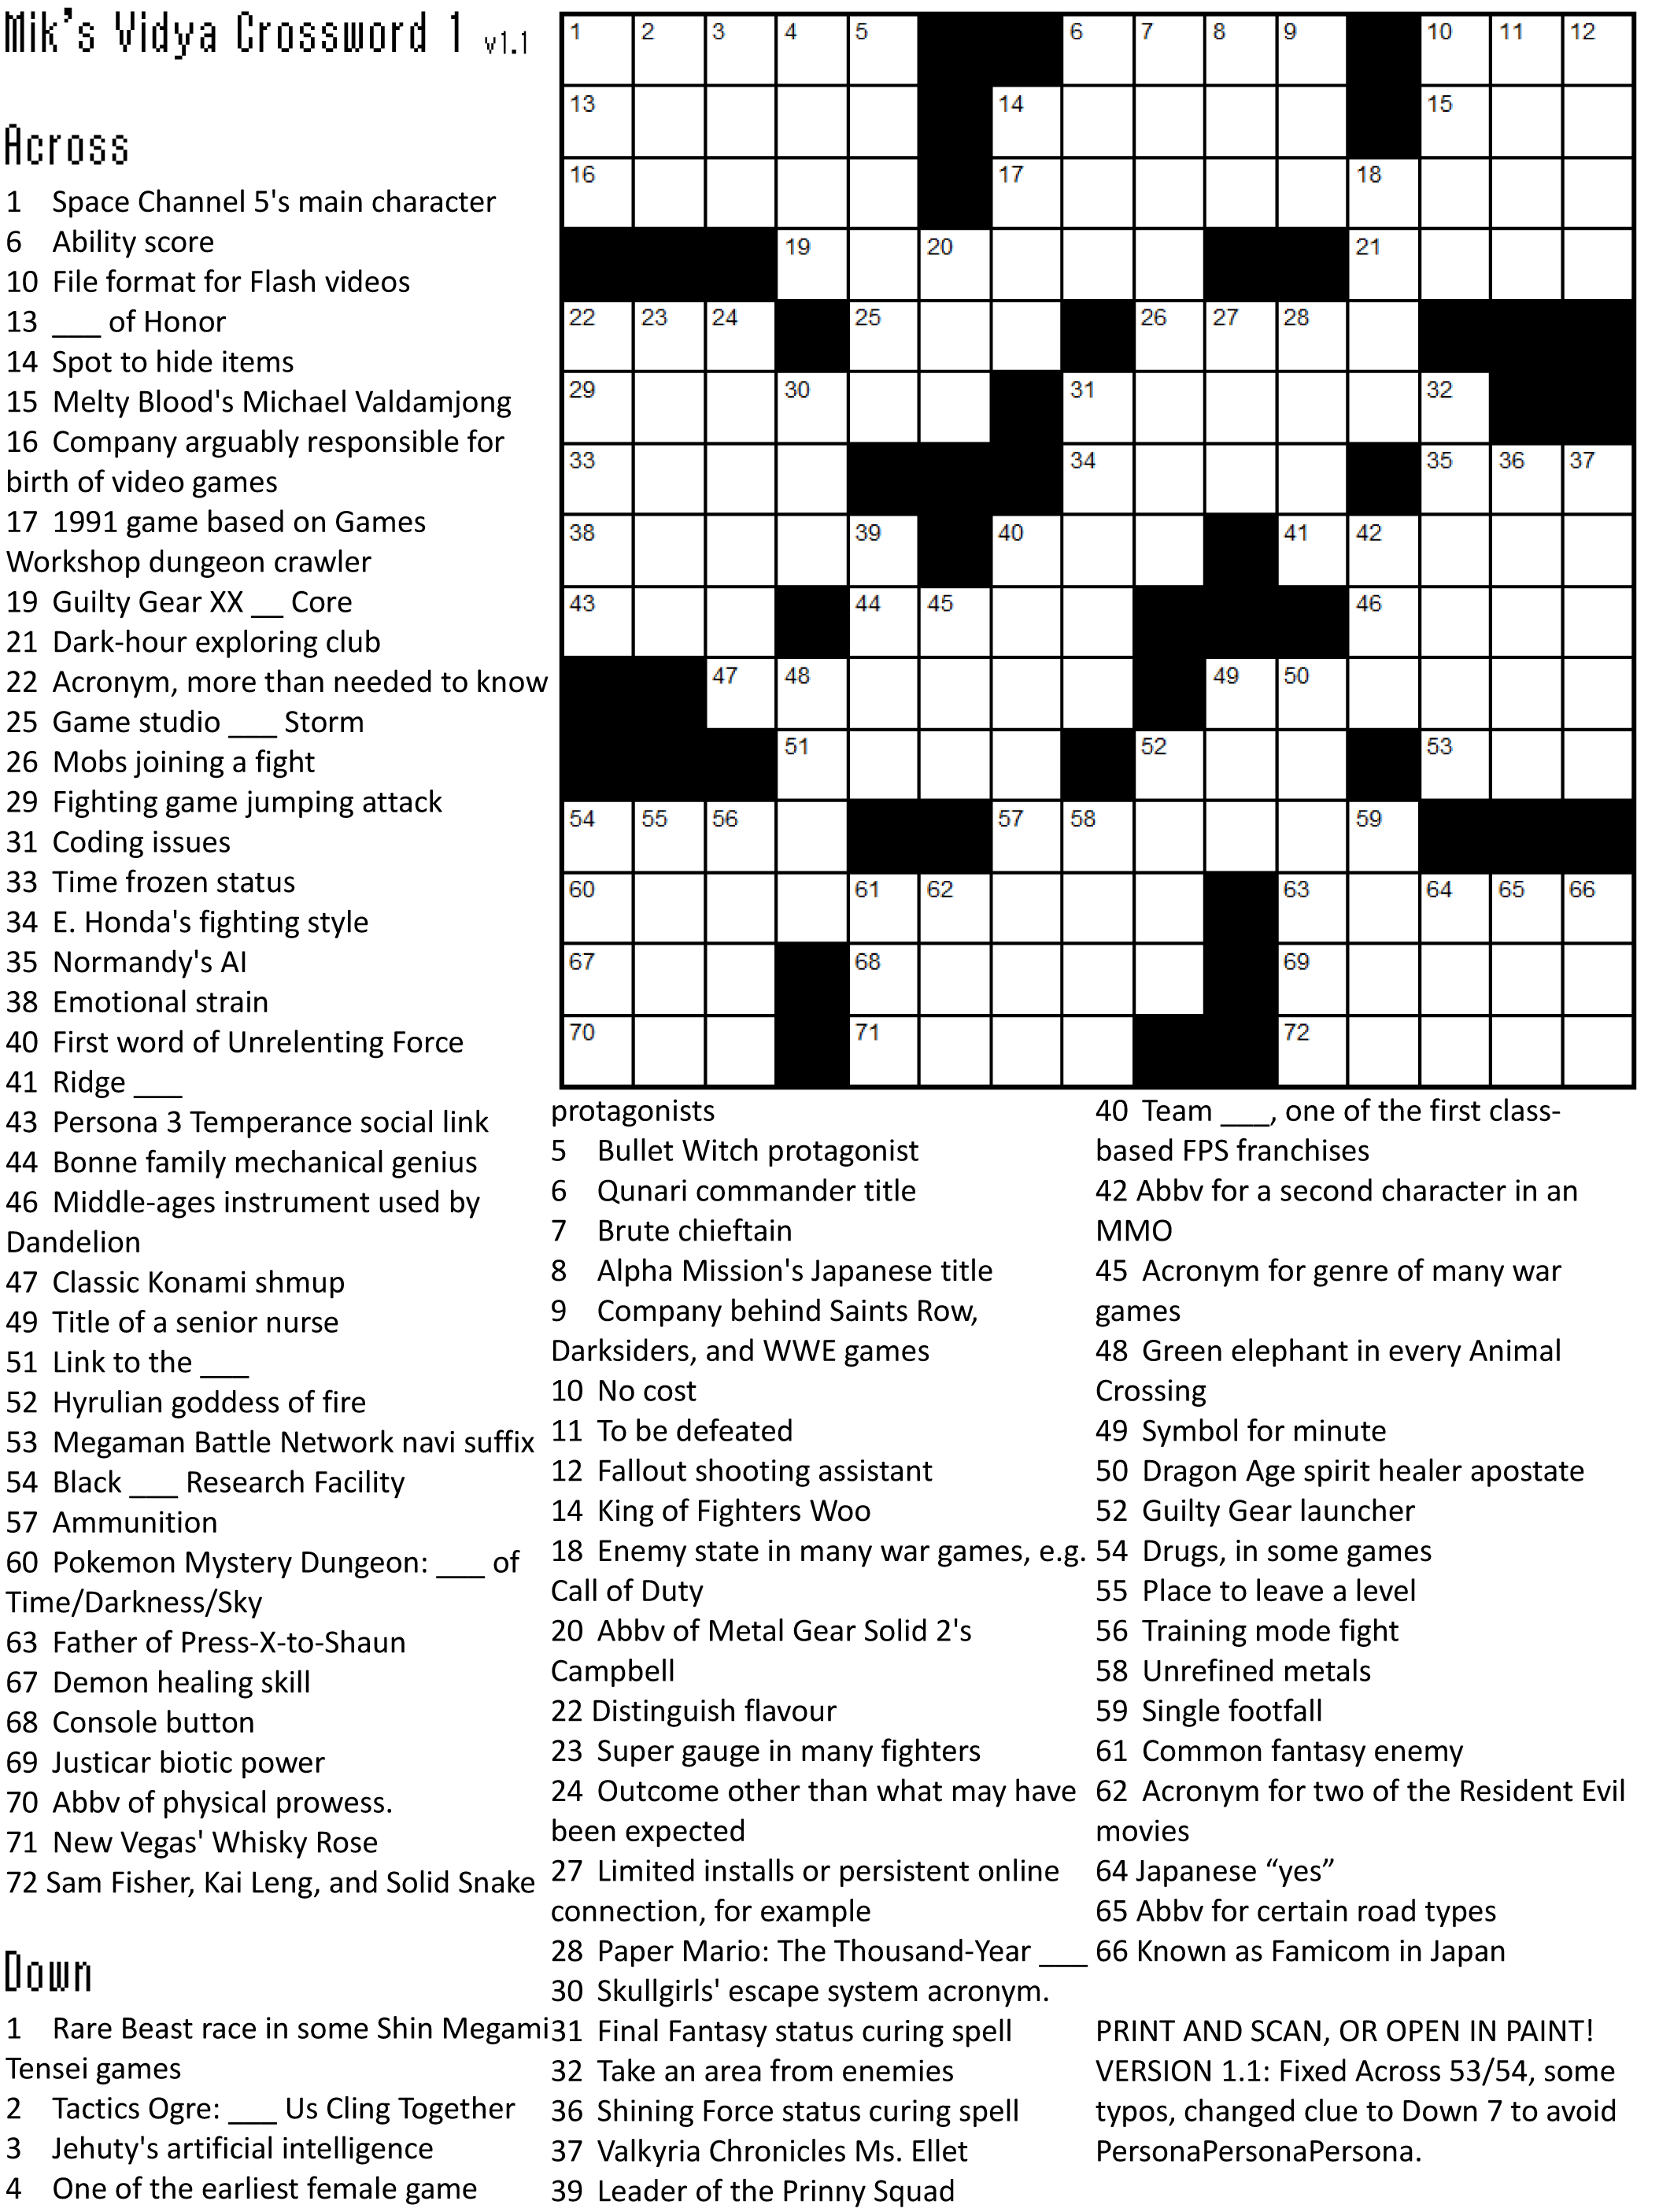 Disney Crossword Puzzles Printable For Adults Crossword Puzzle 